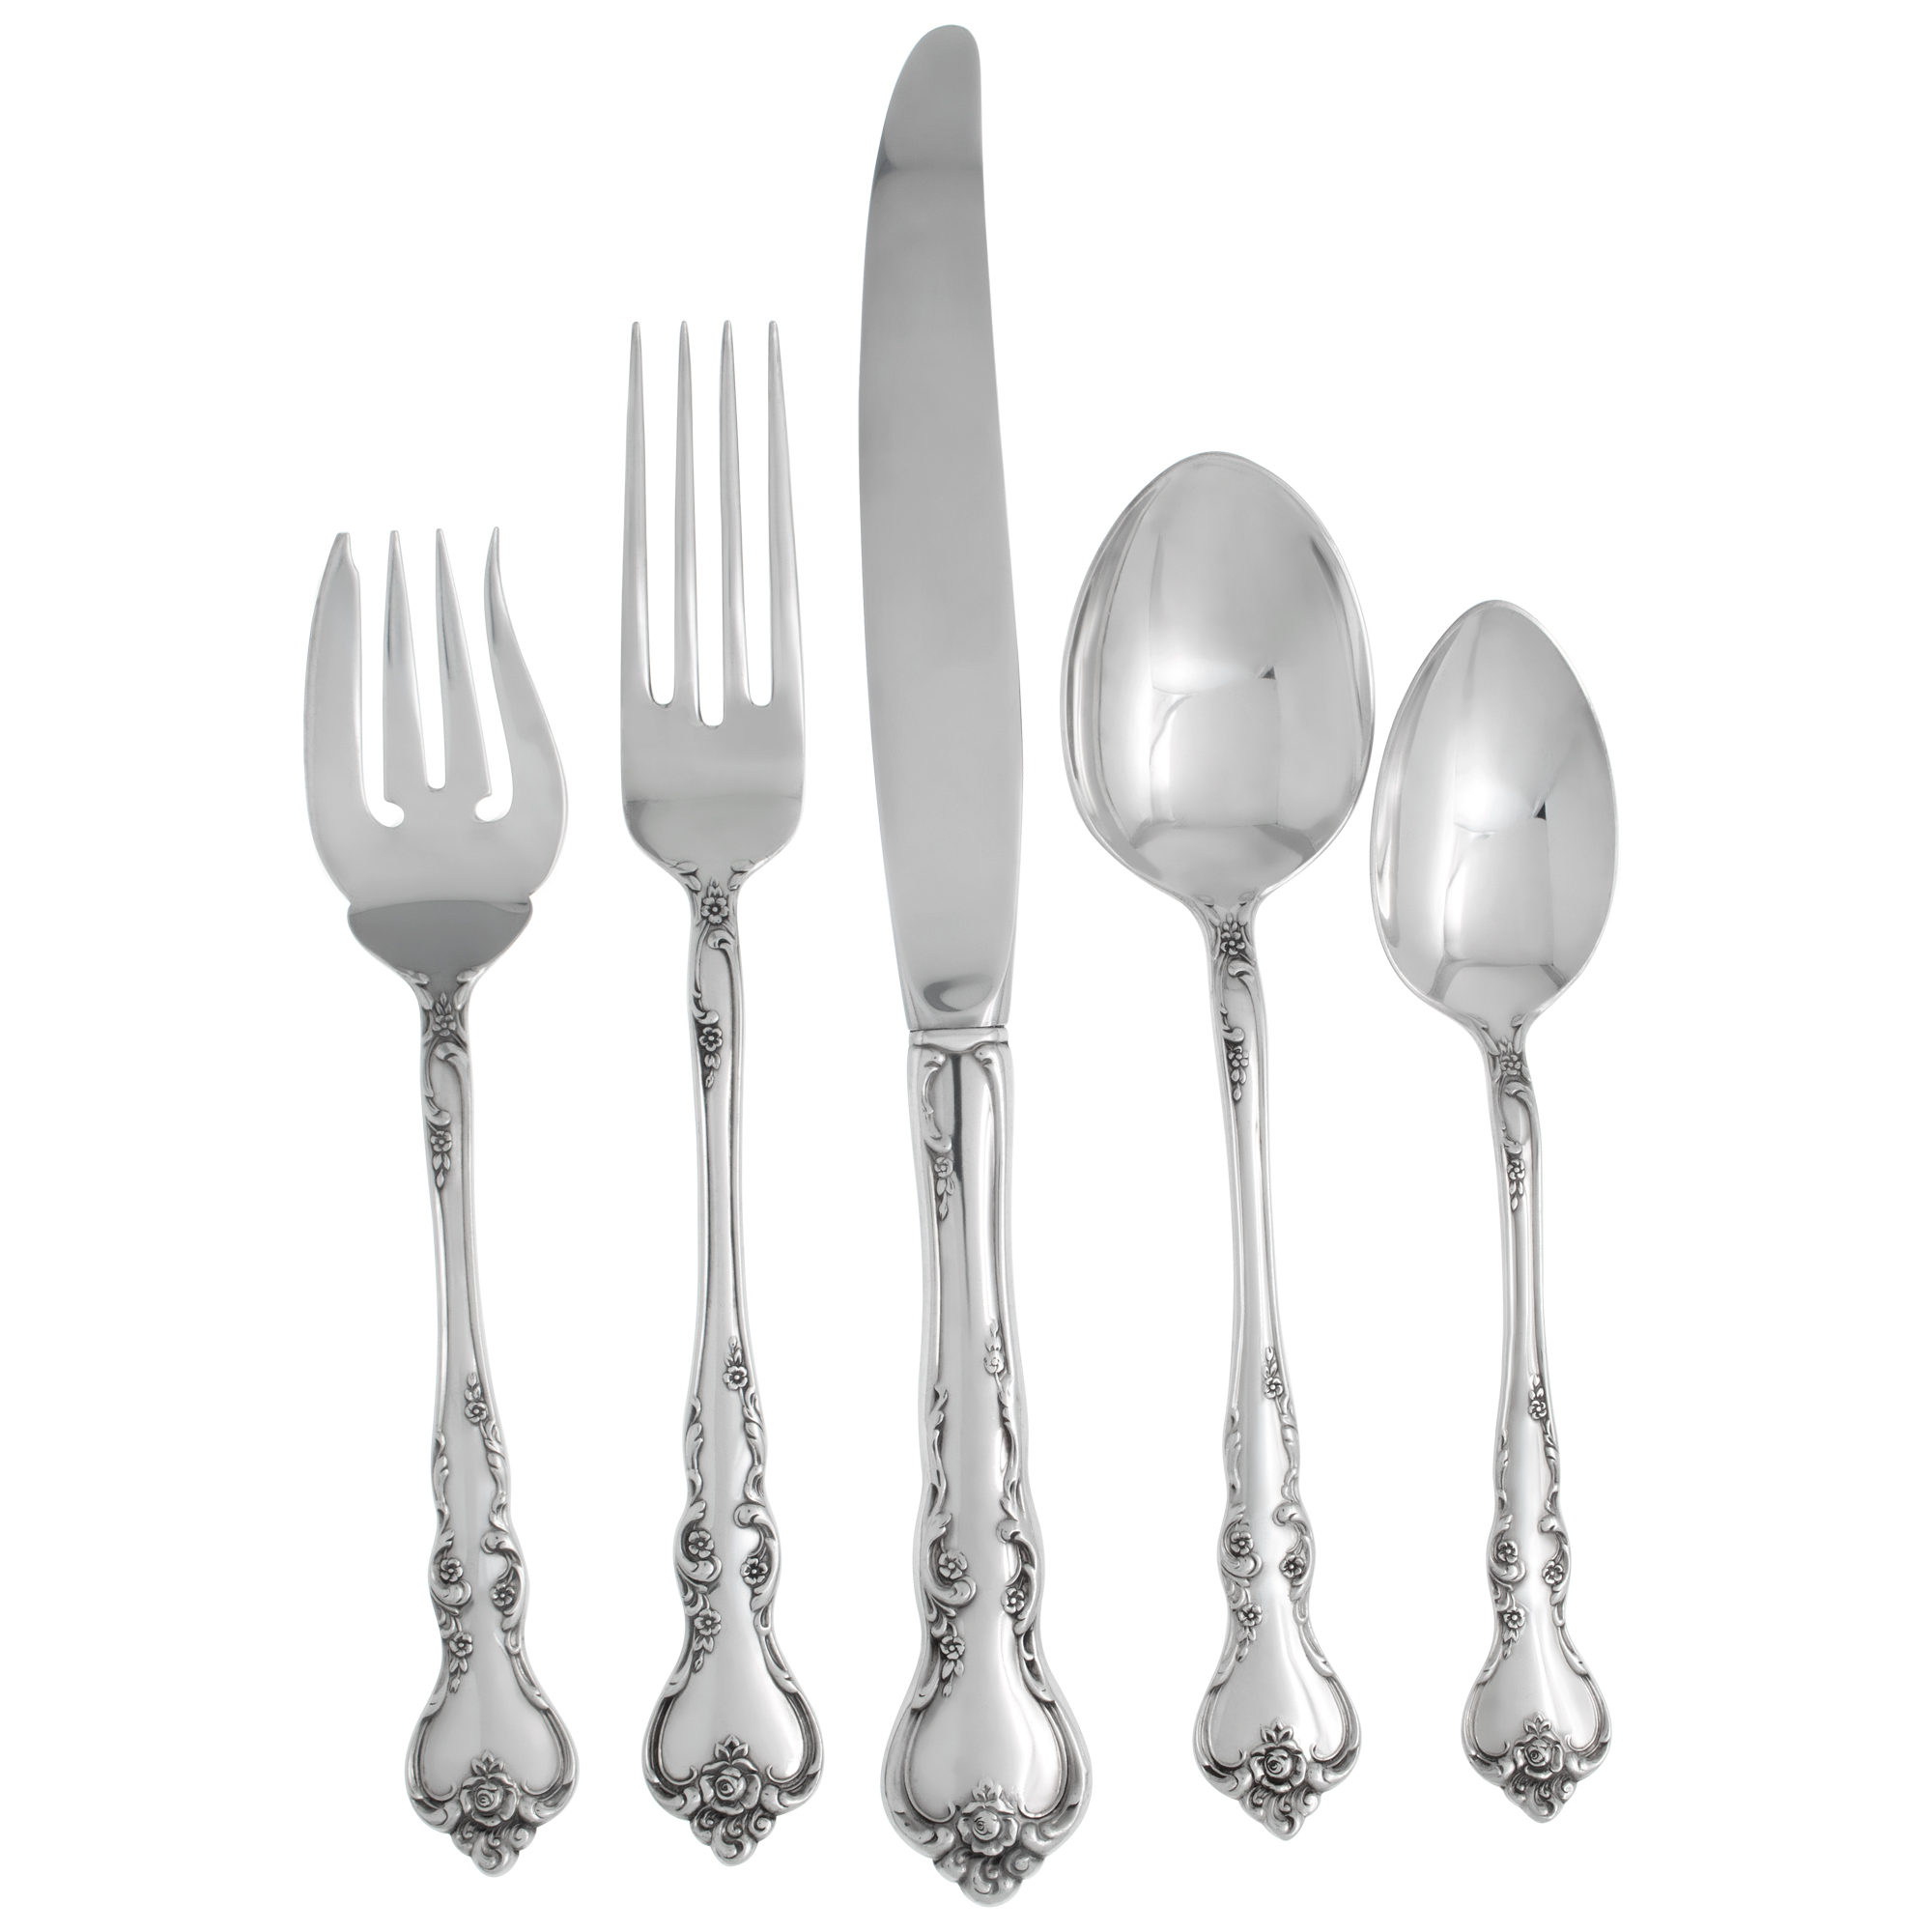 SAVANNAH sterling flatware set patented in 1962 by Reed & Barton. 5 Place setting for 12 + 3 serving pieces. image 1